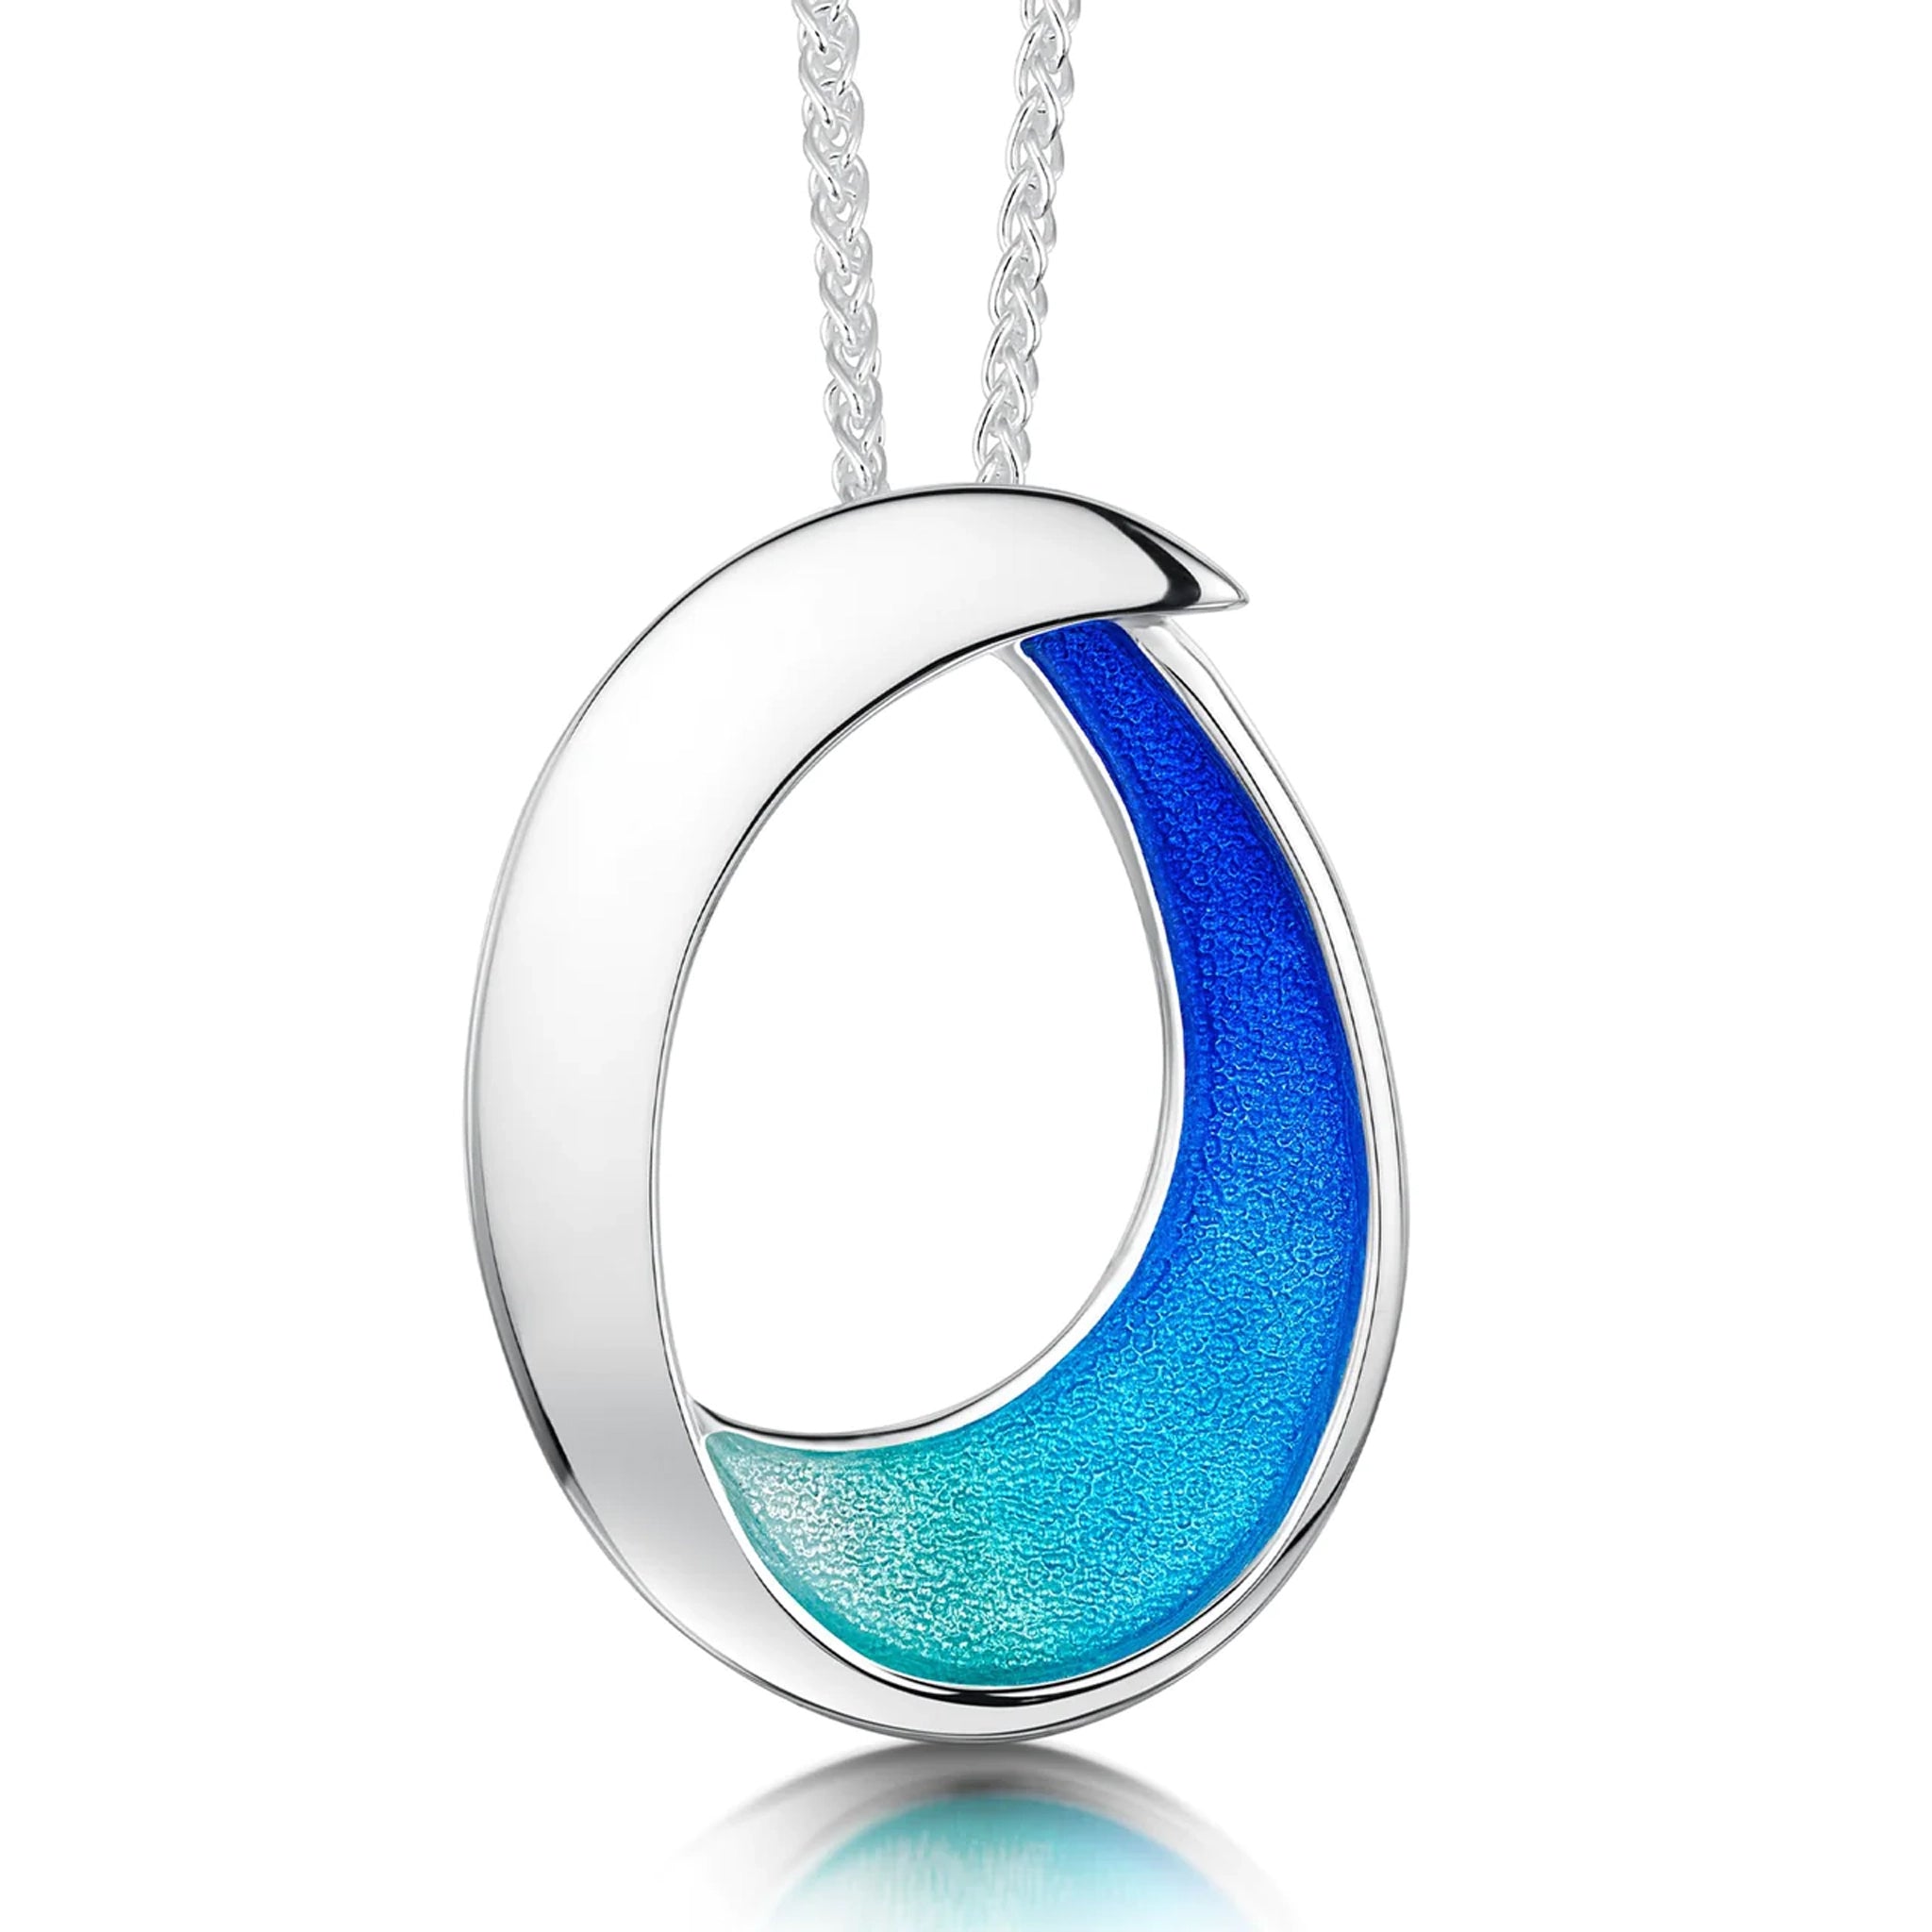 Large silver pendant with bright blue enamel in a simple abstract ocean wave shape on a silver chain